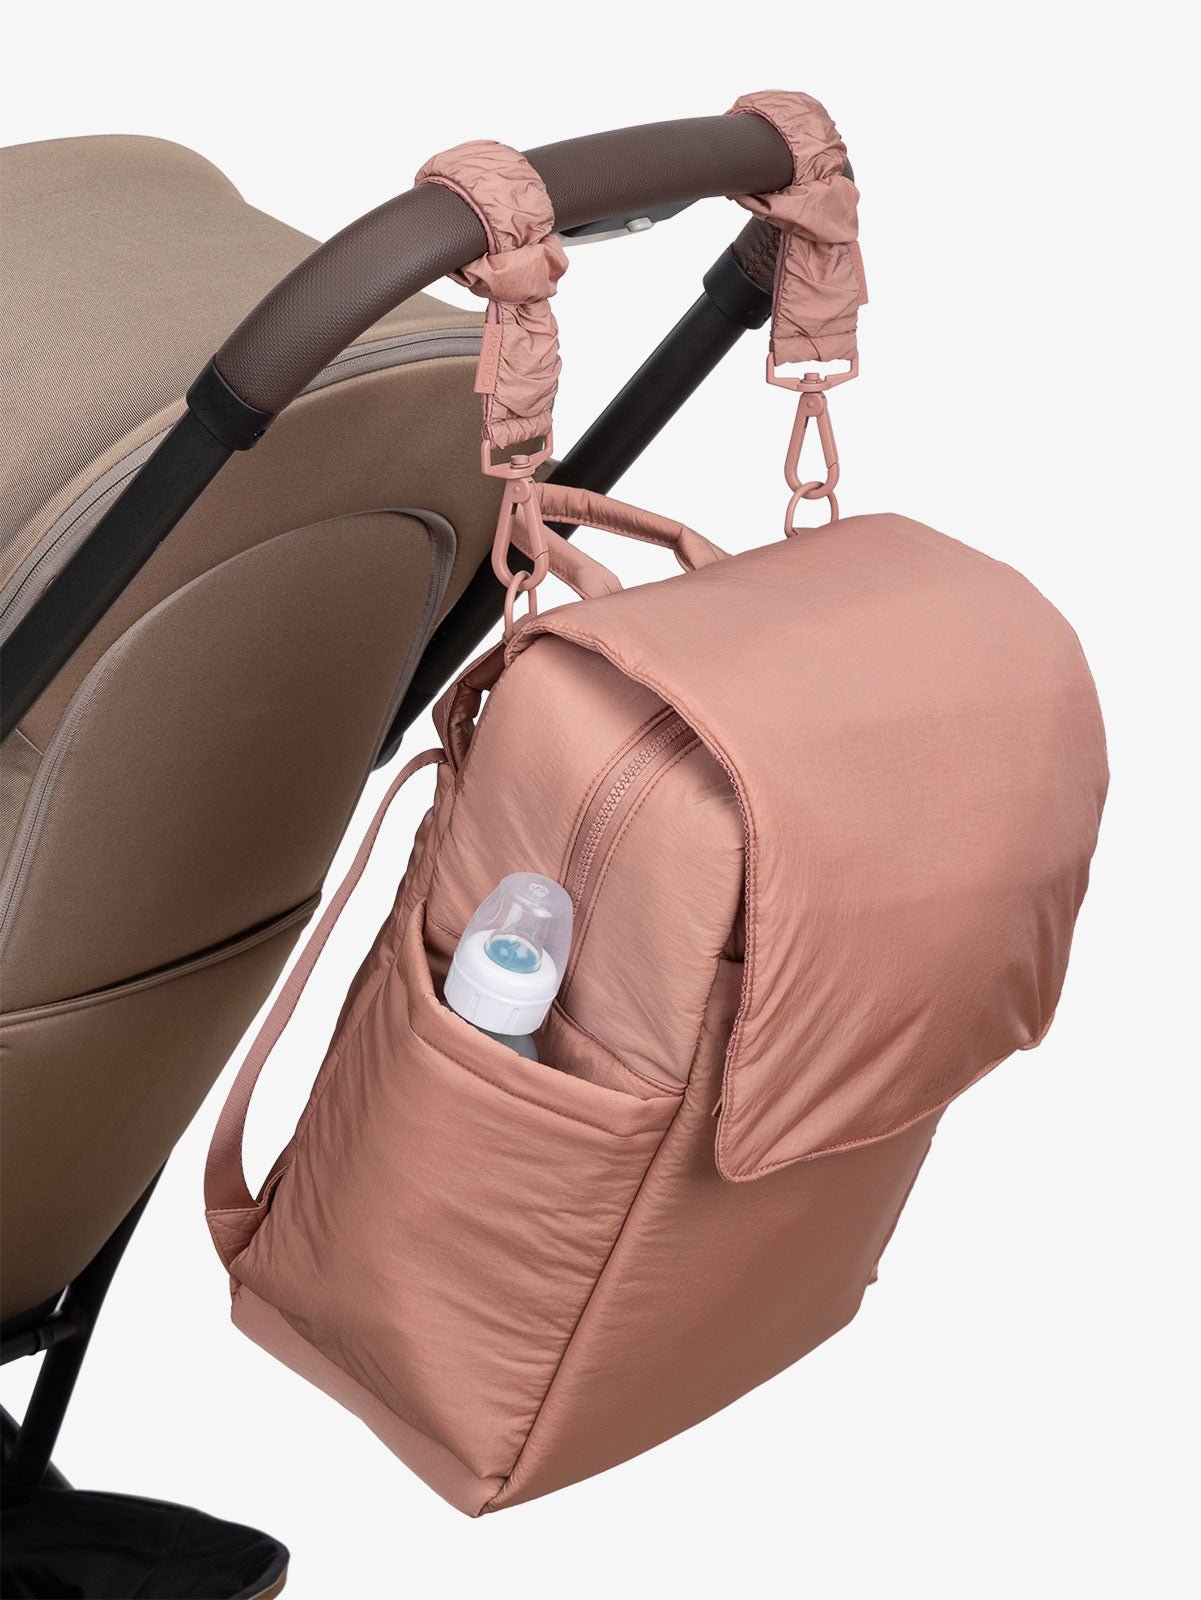 CALPAK Diaper Backpack with Laptop Sleeve attached to stroller by CALPAK Stroller Straps in peony